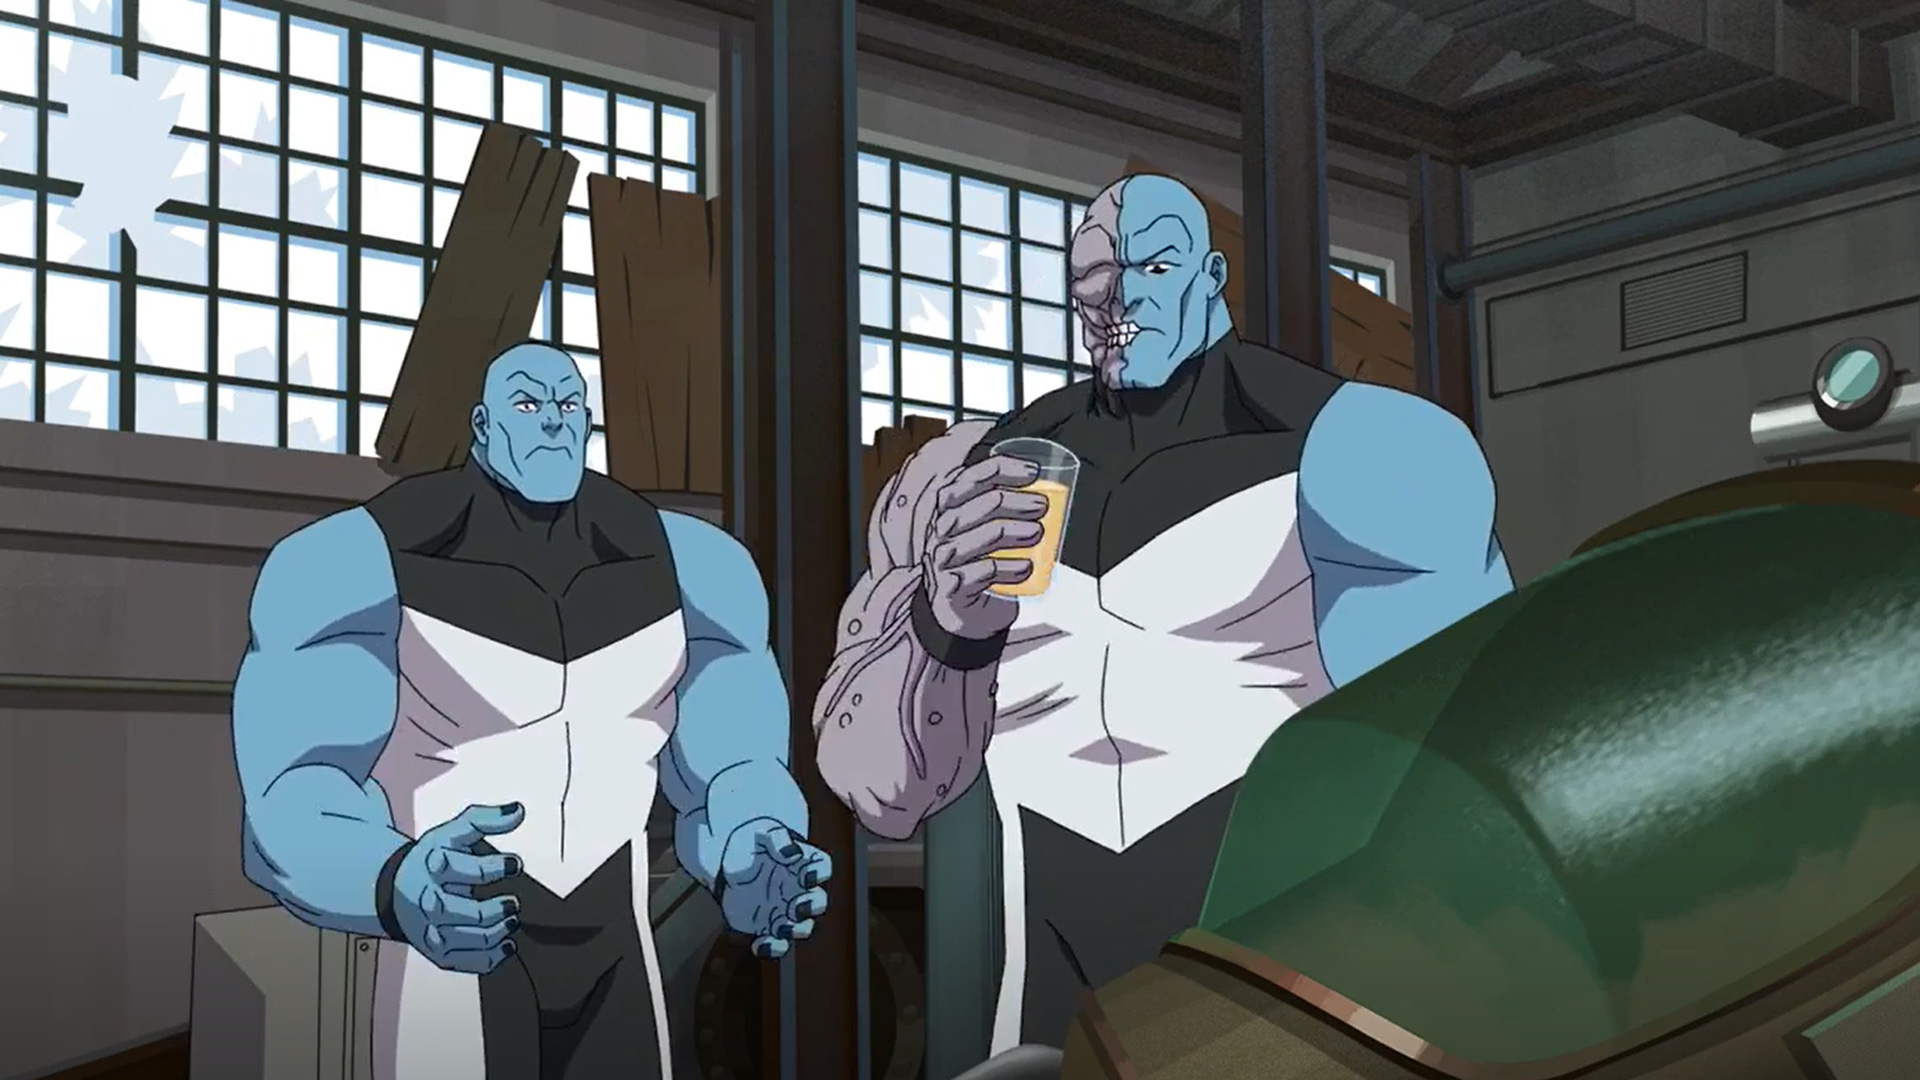 Mauler Prime drinks some lemonade made by his clone in Invincible season 2 episode 4